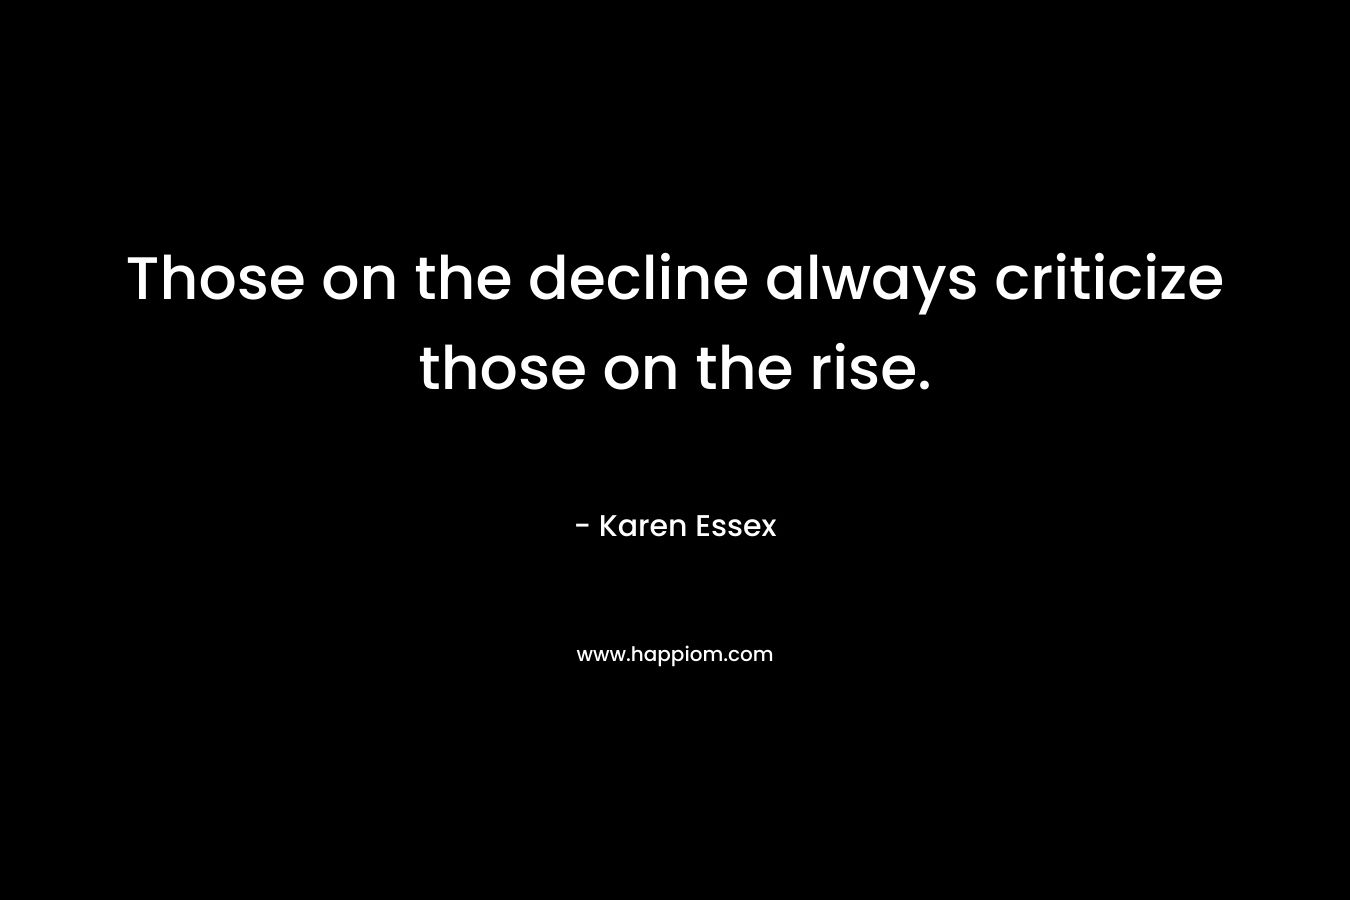 Those on the decline always criticize those on the rise.